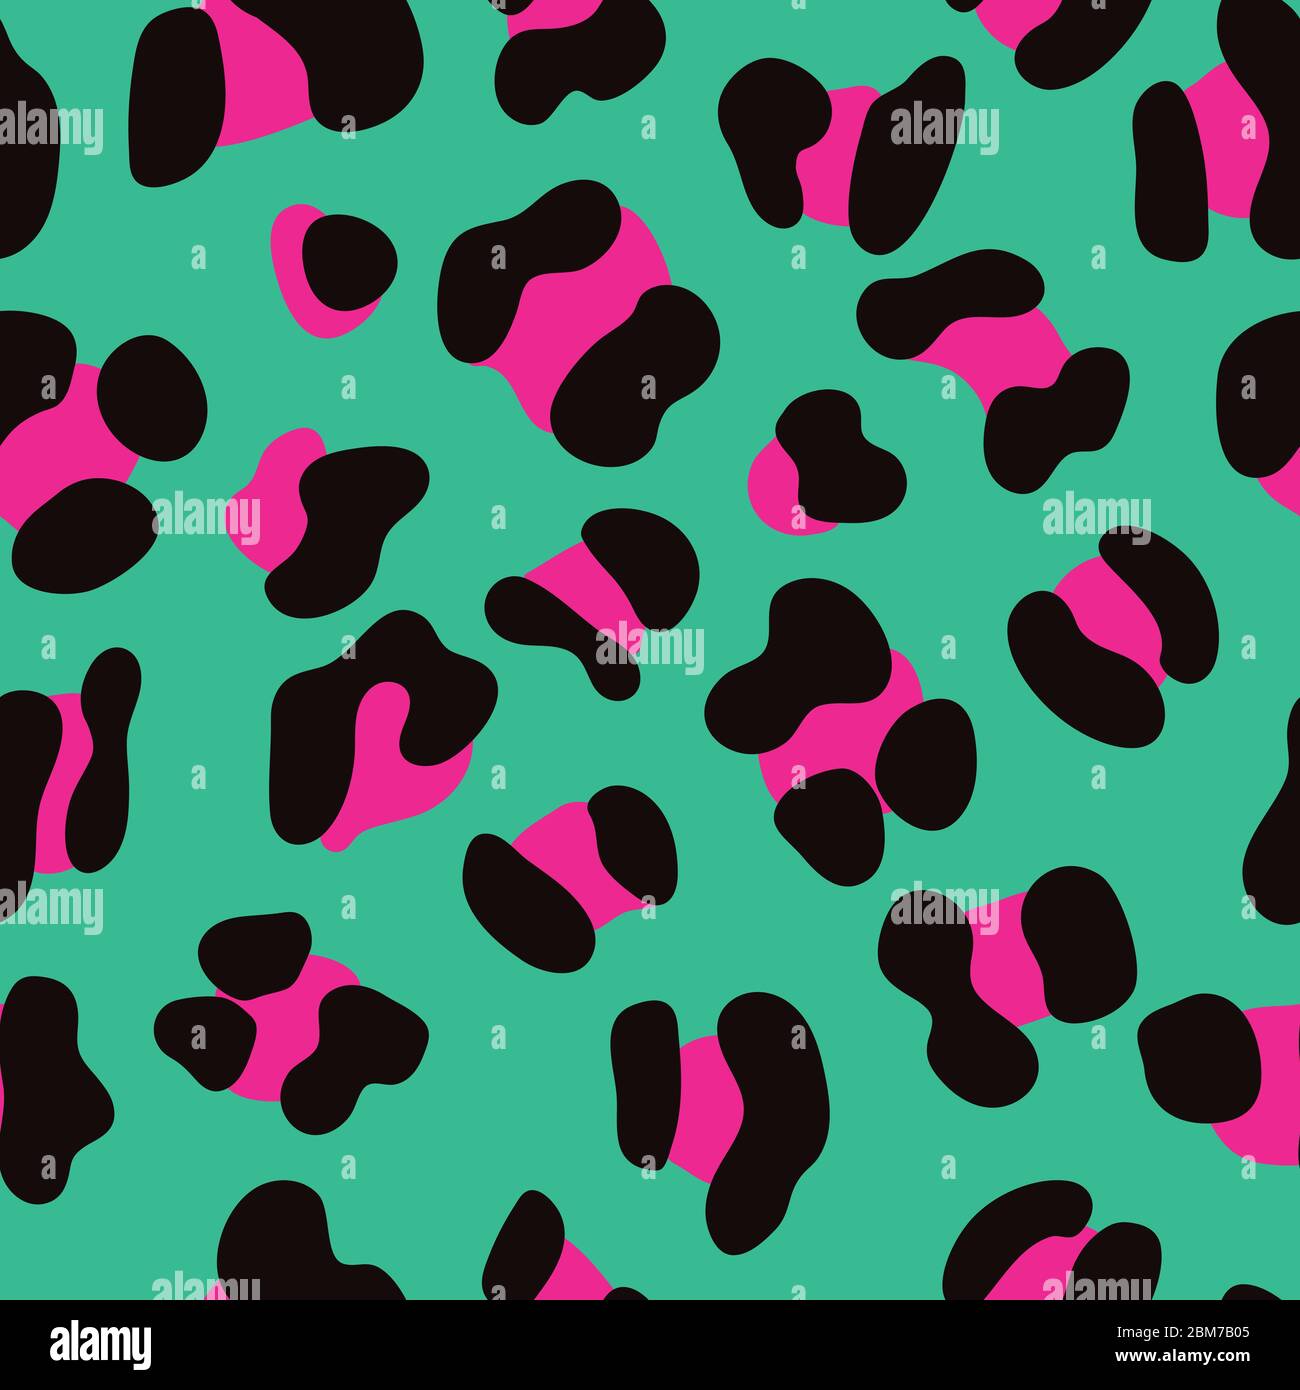 Seamless Faux Leopard Skin Pattern with pink spots on green background. Vector illustration animal repeat surface pattern. Eighties/80s style pattern. Stock Vector